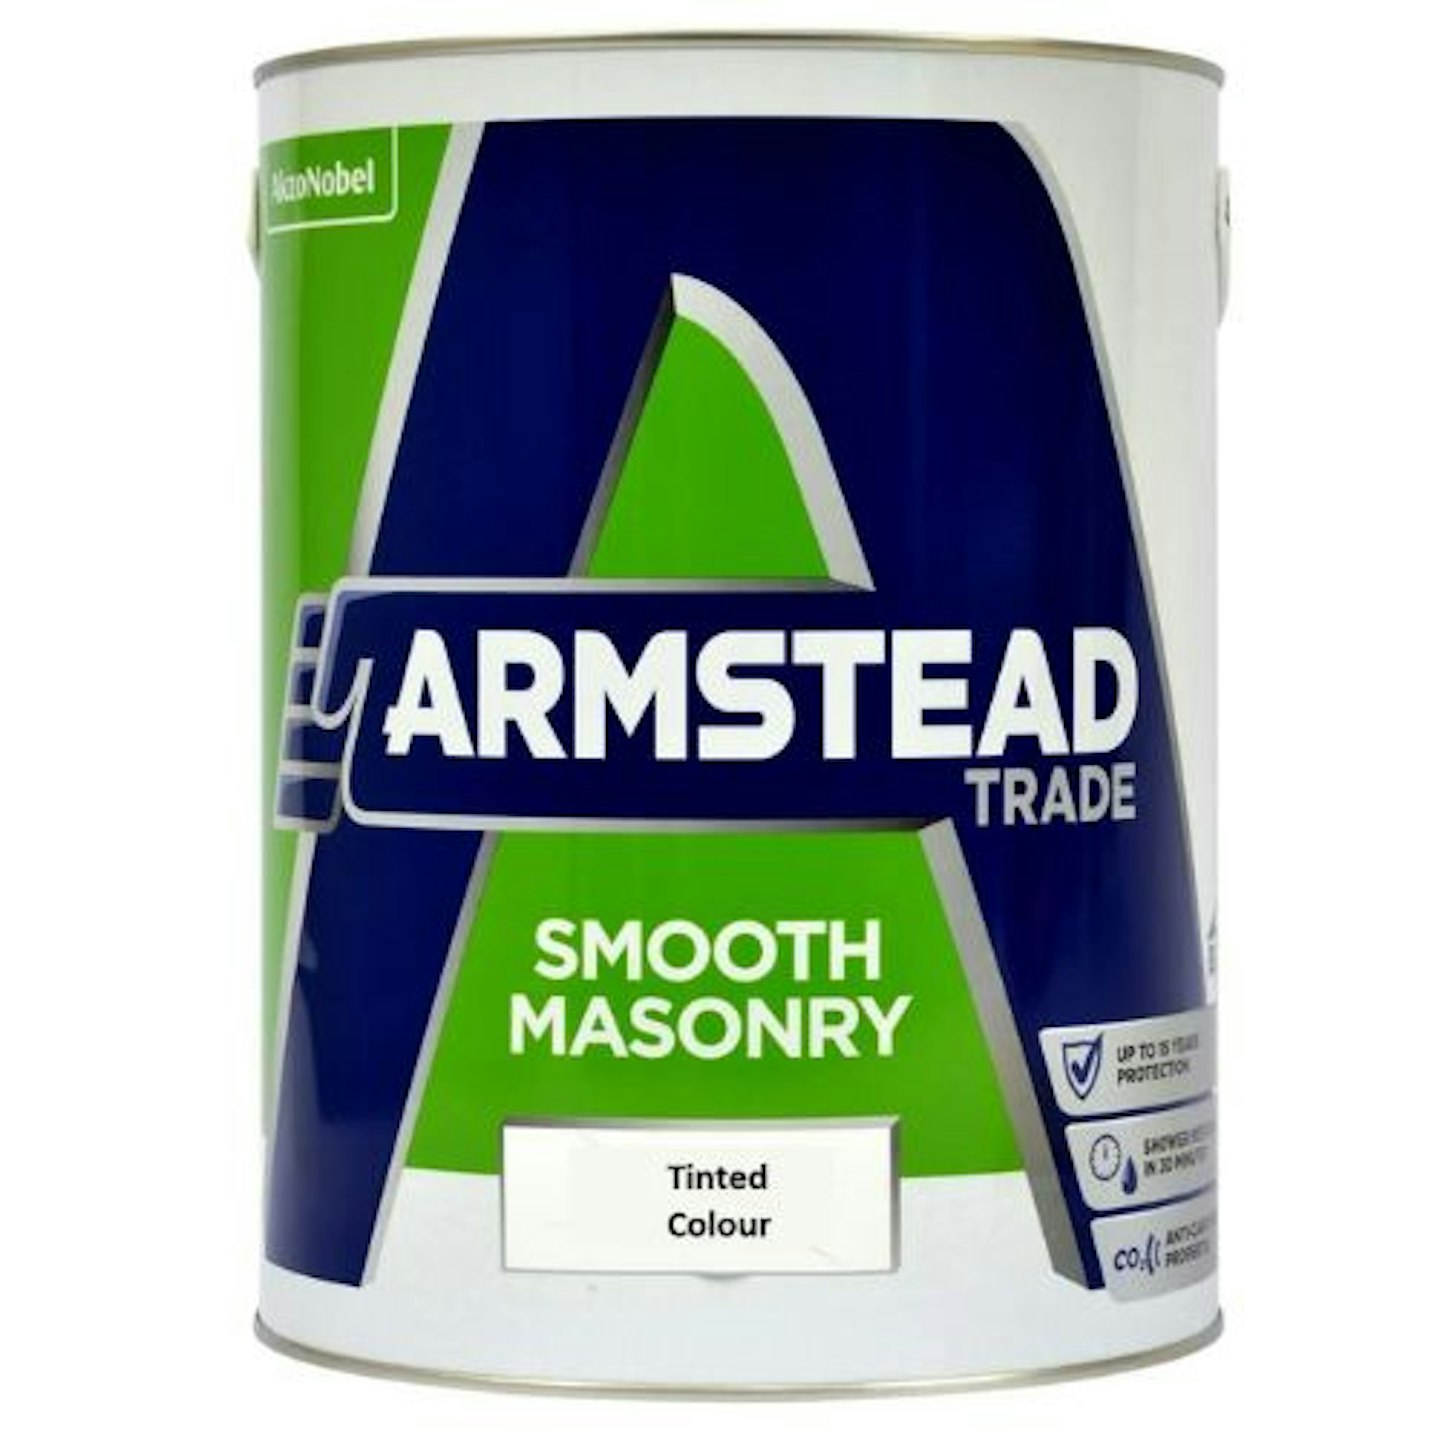 Armstead Trade Smooth Masonry Tinted Colours 5l